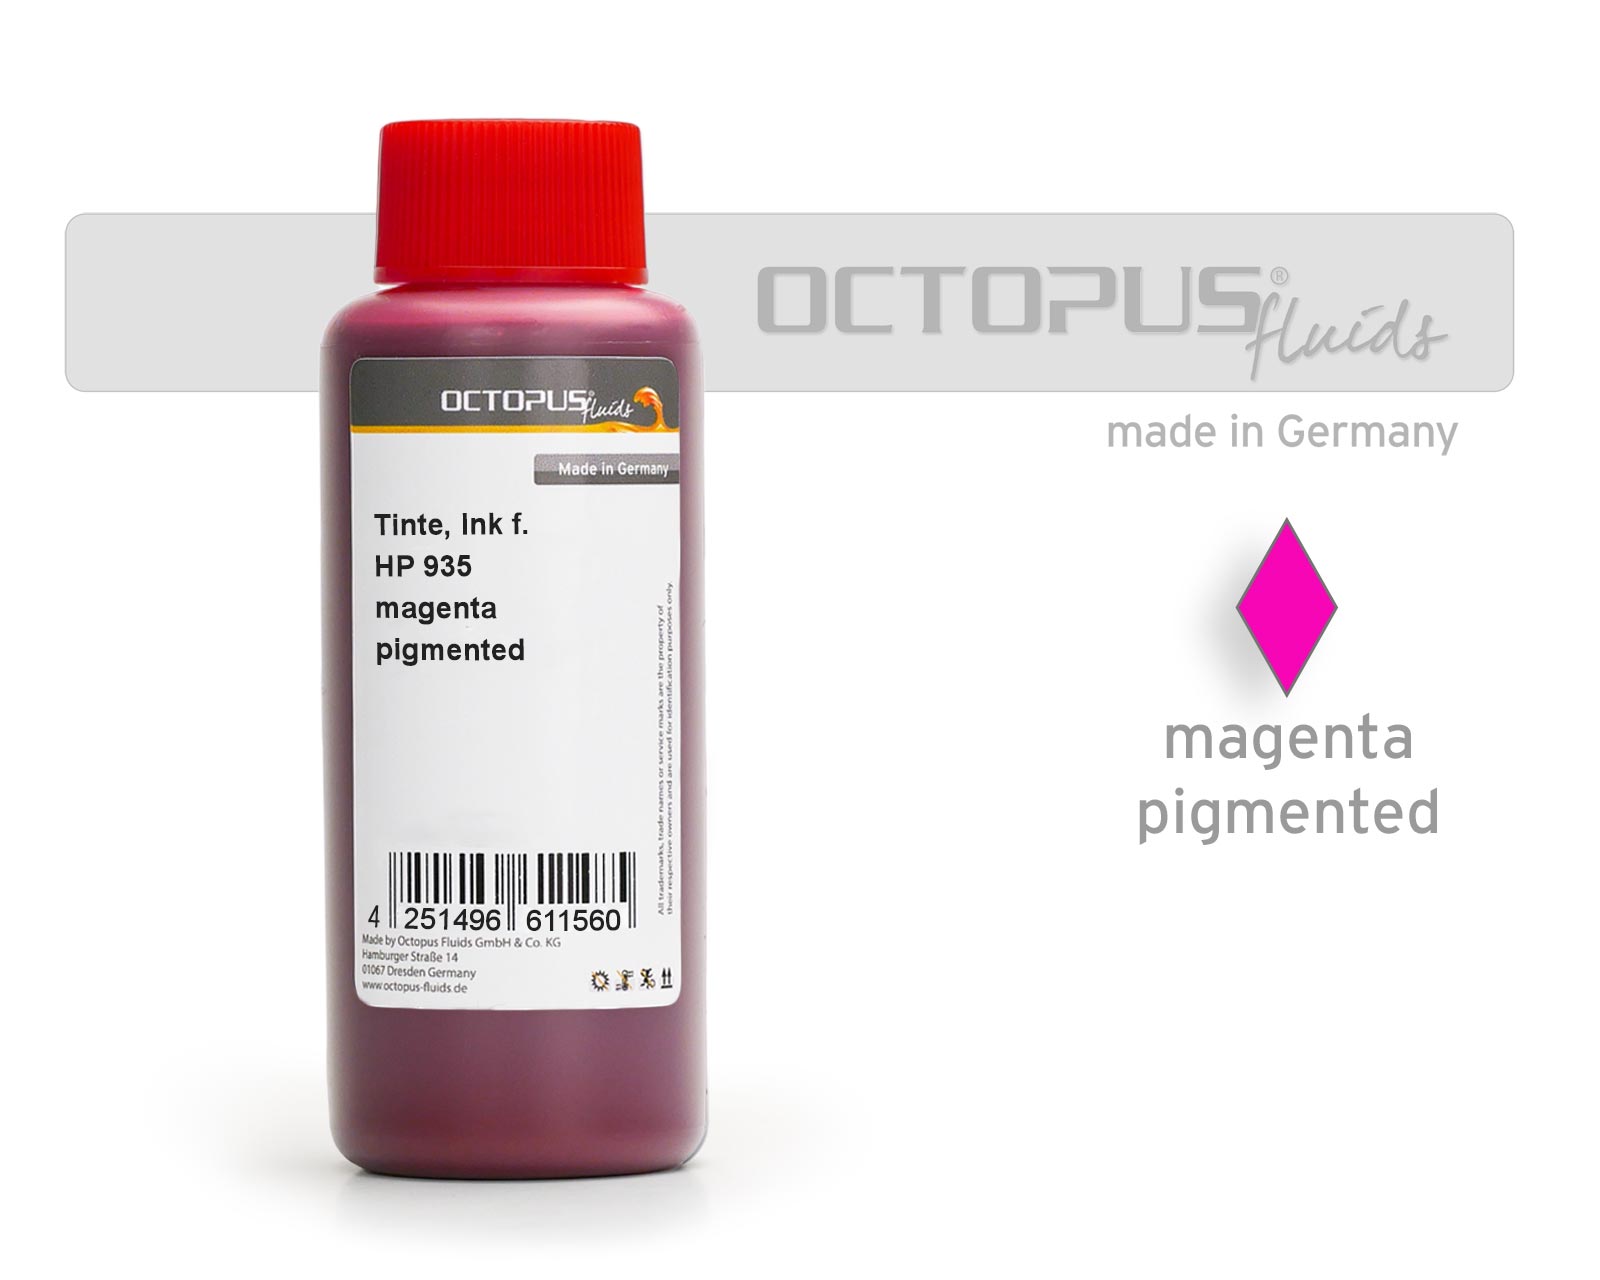 Refill ink for HP 935 cartridges magenta pigmented